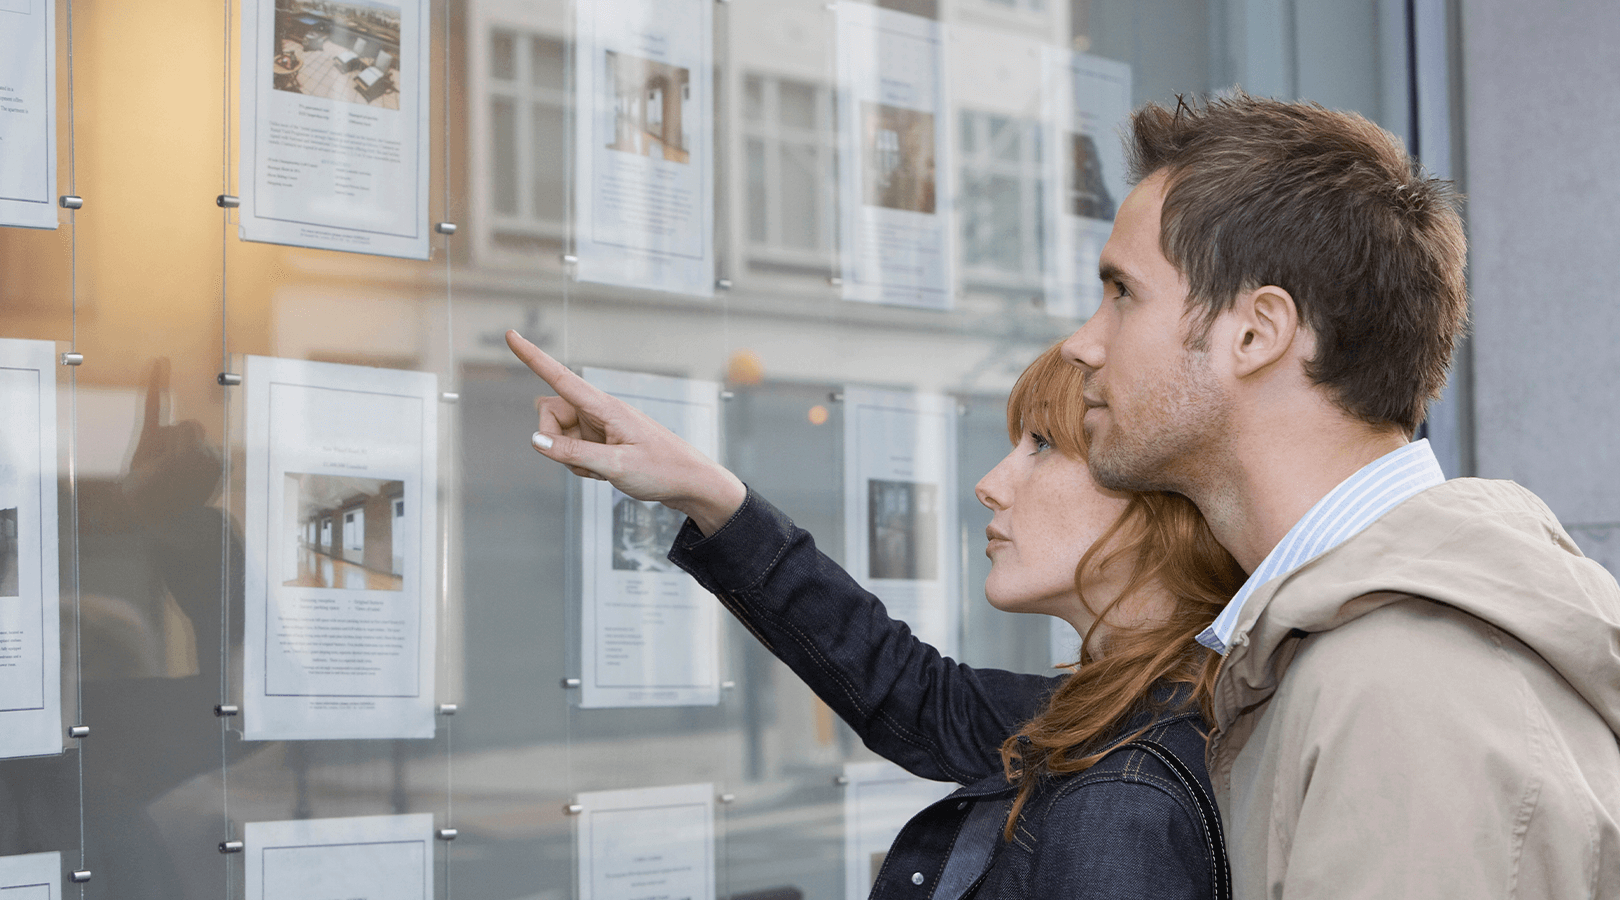 Couple looking at future homes at estate agents